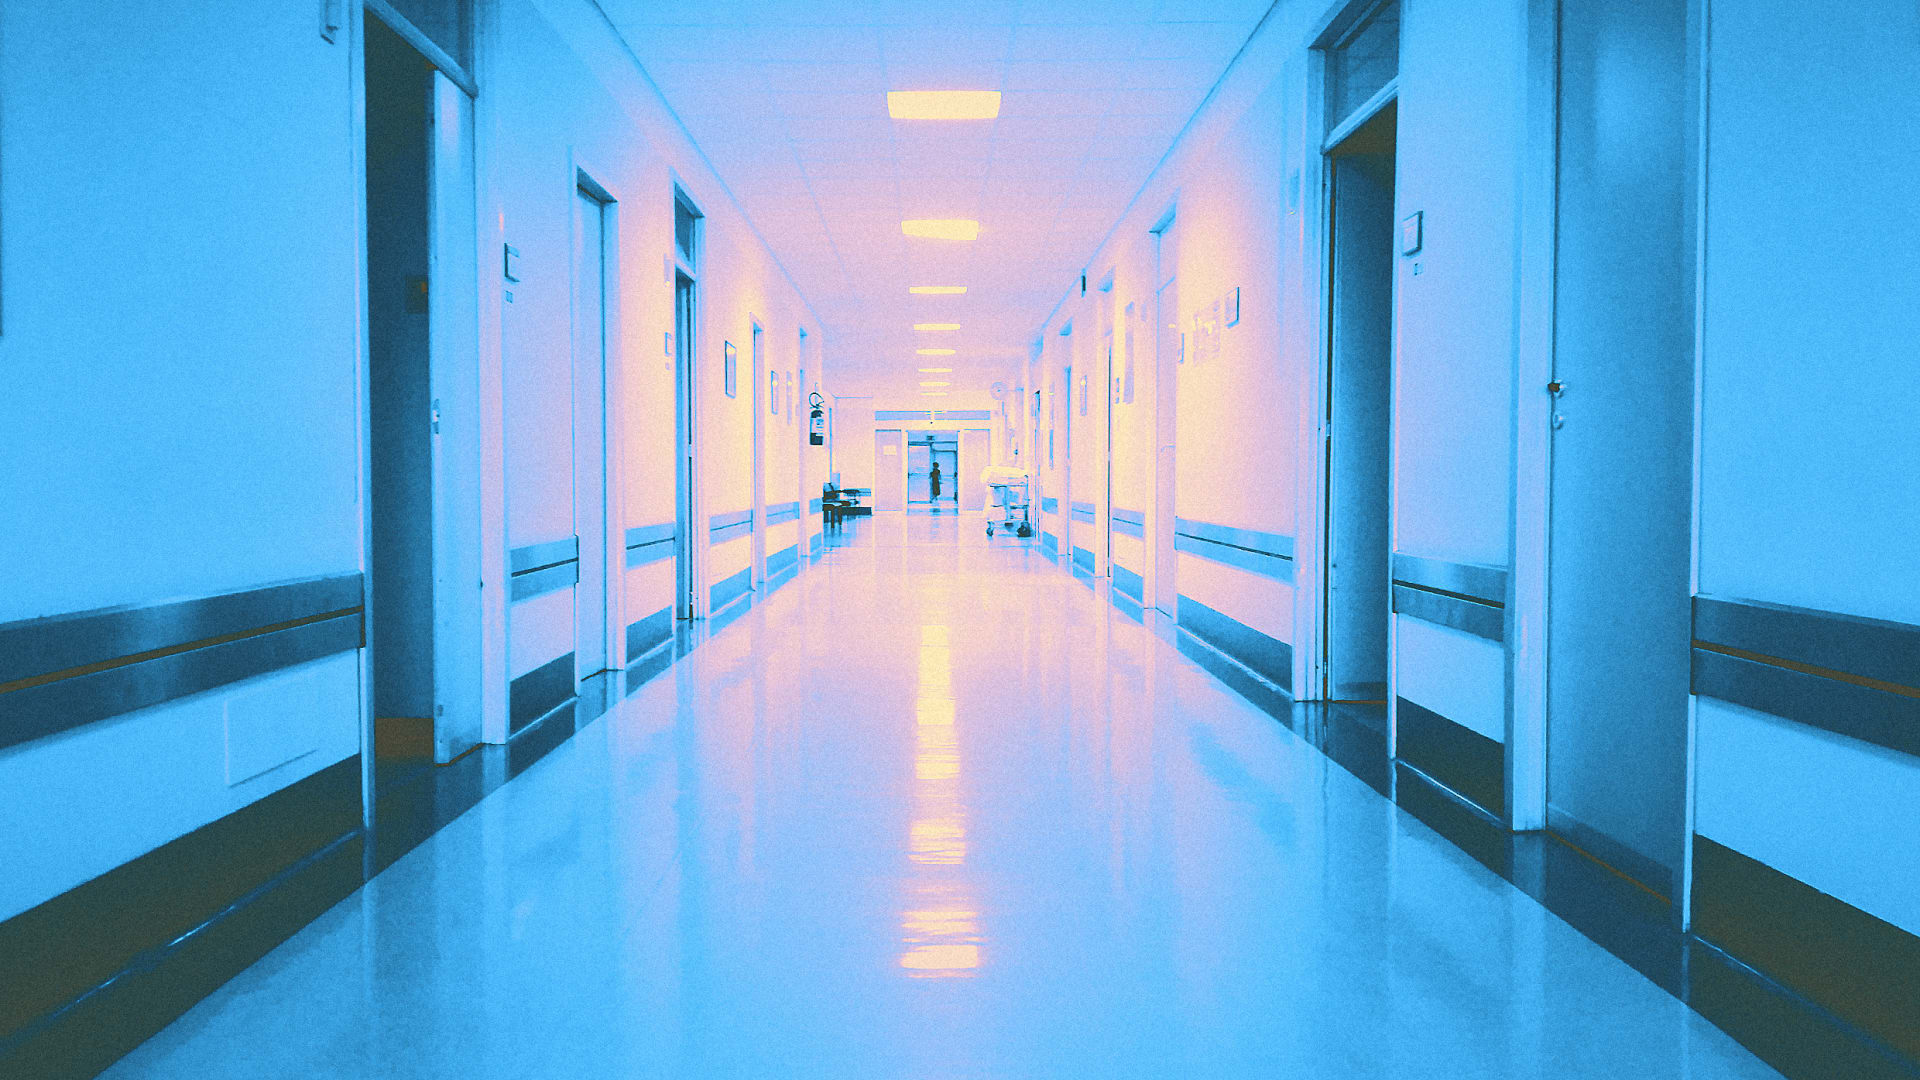 How to design hospitals for the dead and dying